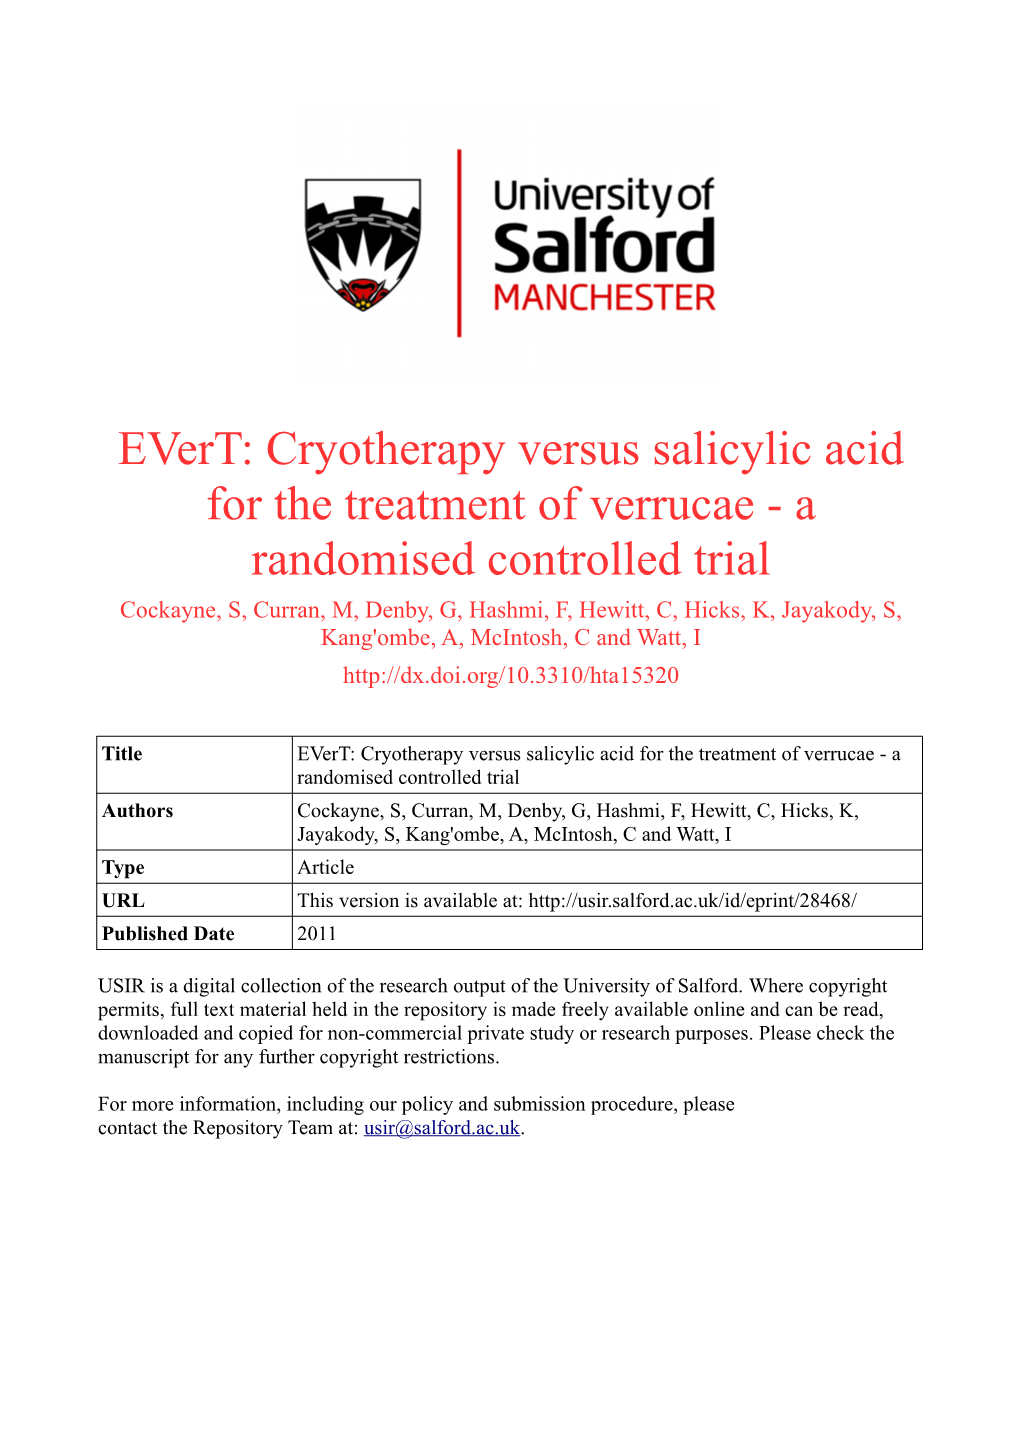 Evert: Cryotherapy Versus Salicylic Acid for the Treatment of Verrucae